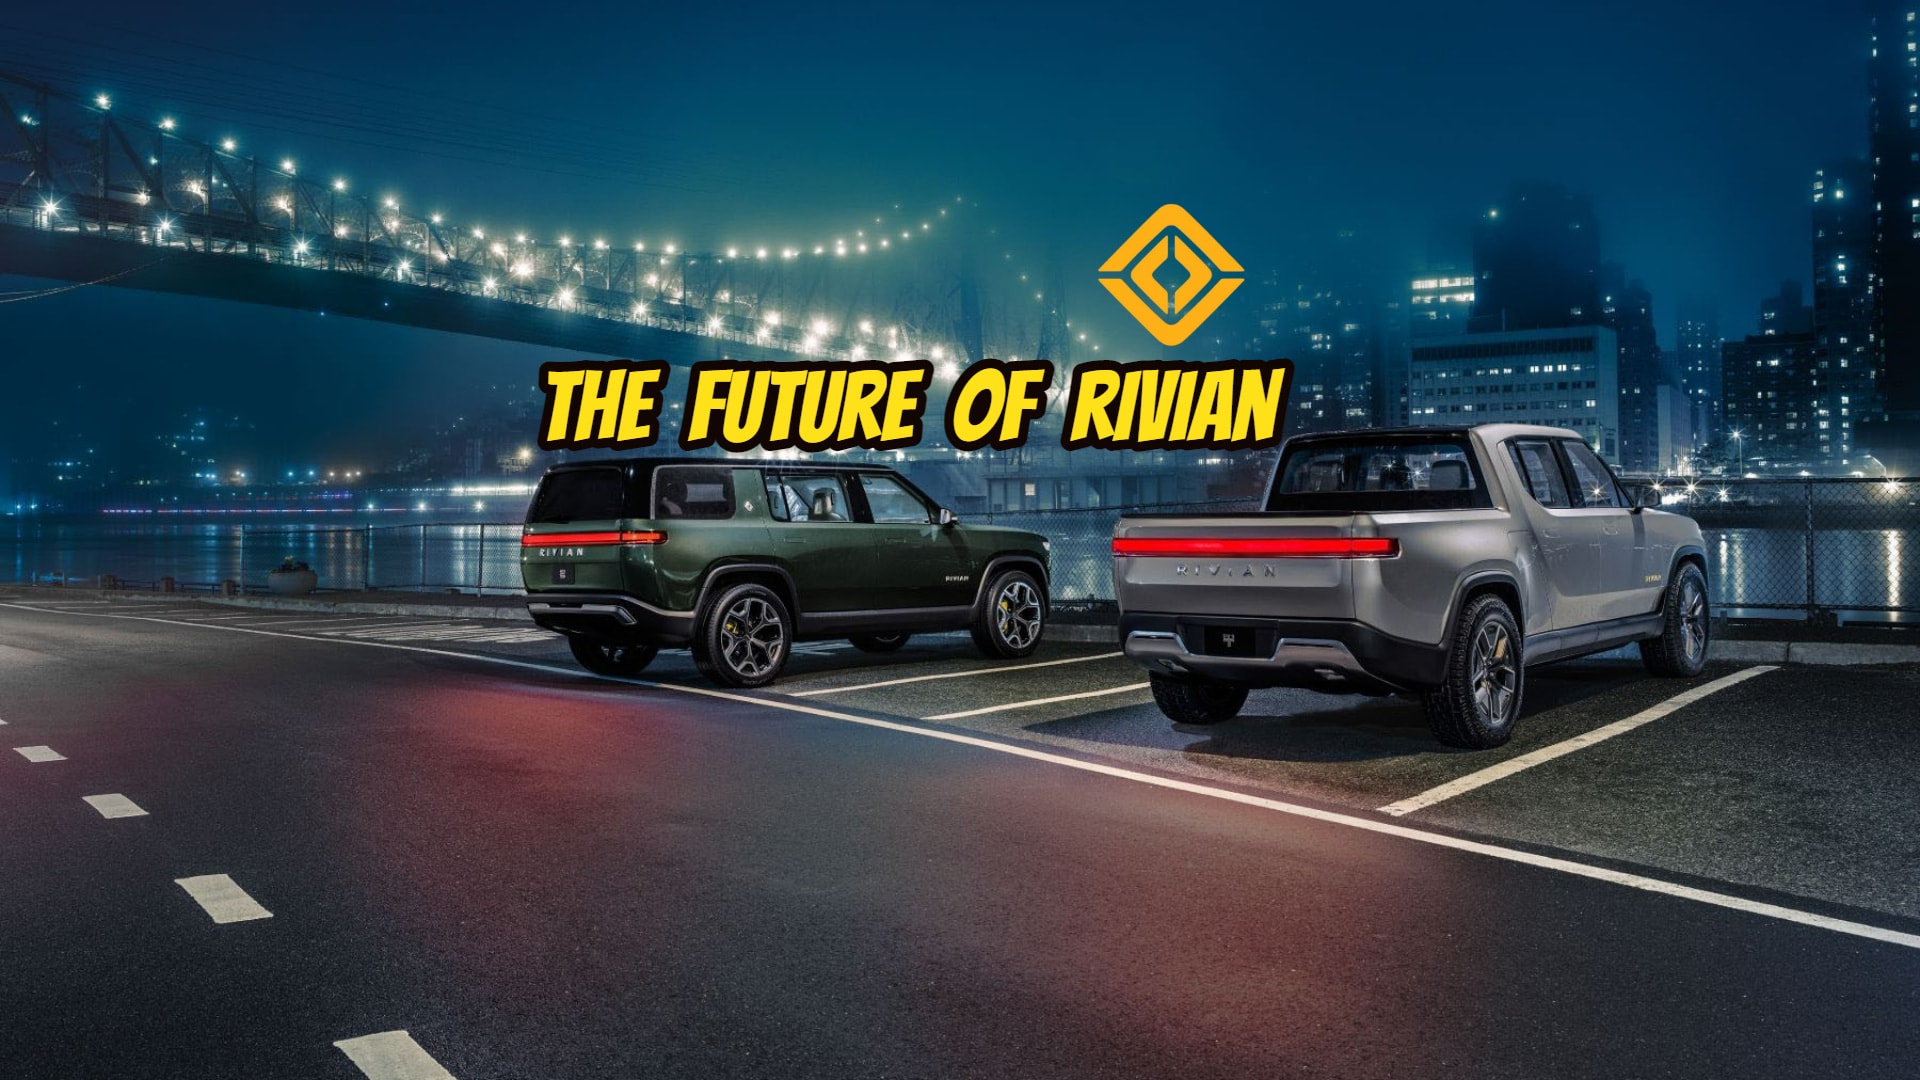 Rivian CFO Says There's No Demand Problem, Confirms Production Downtime